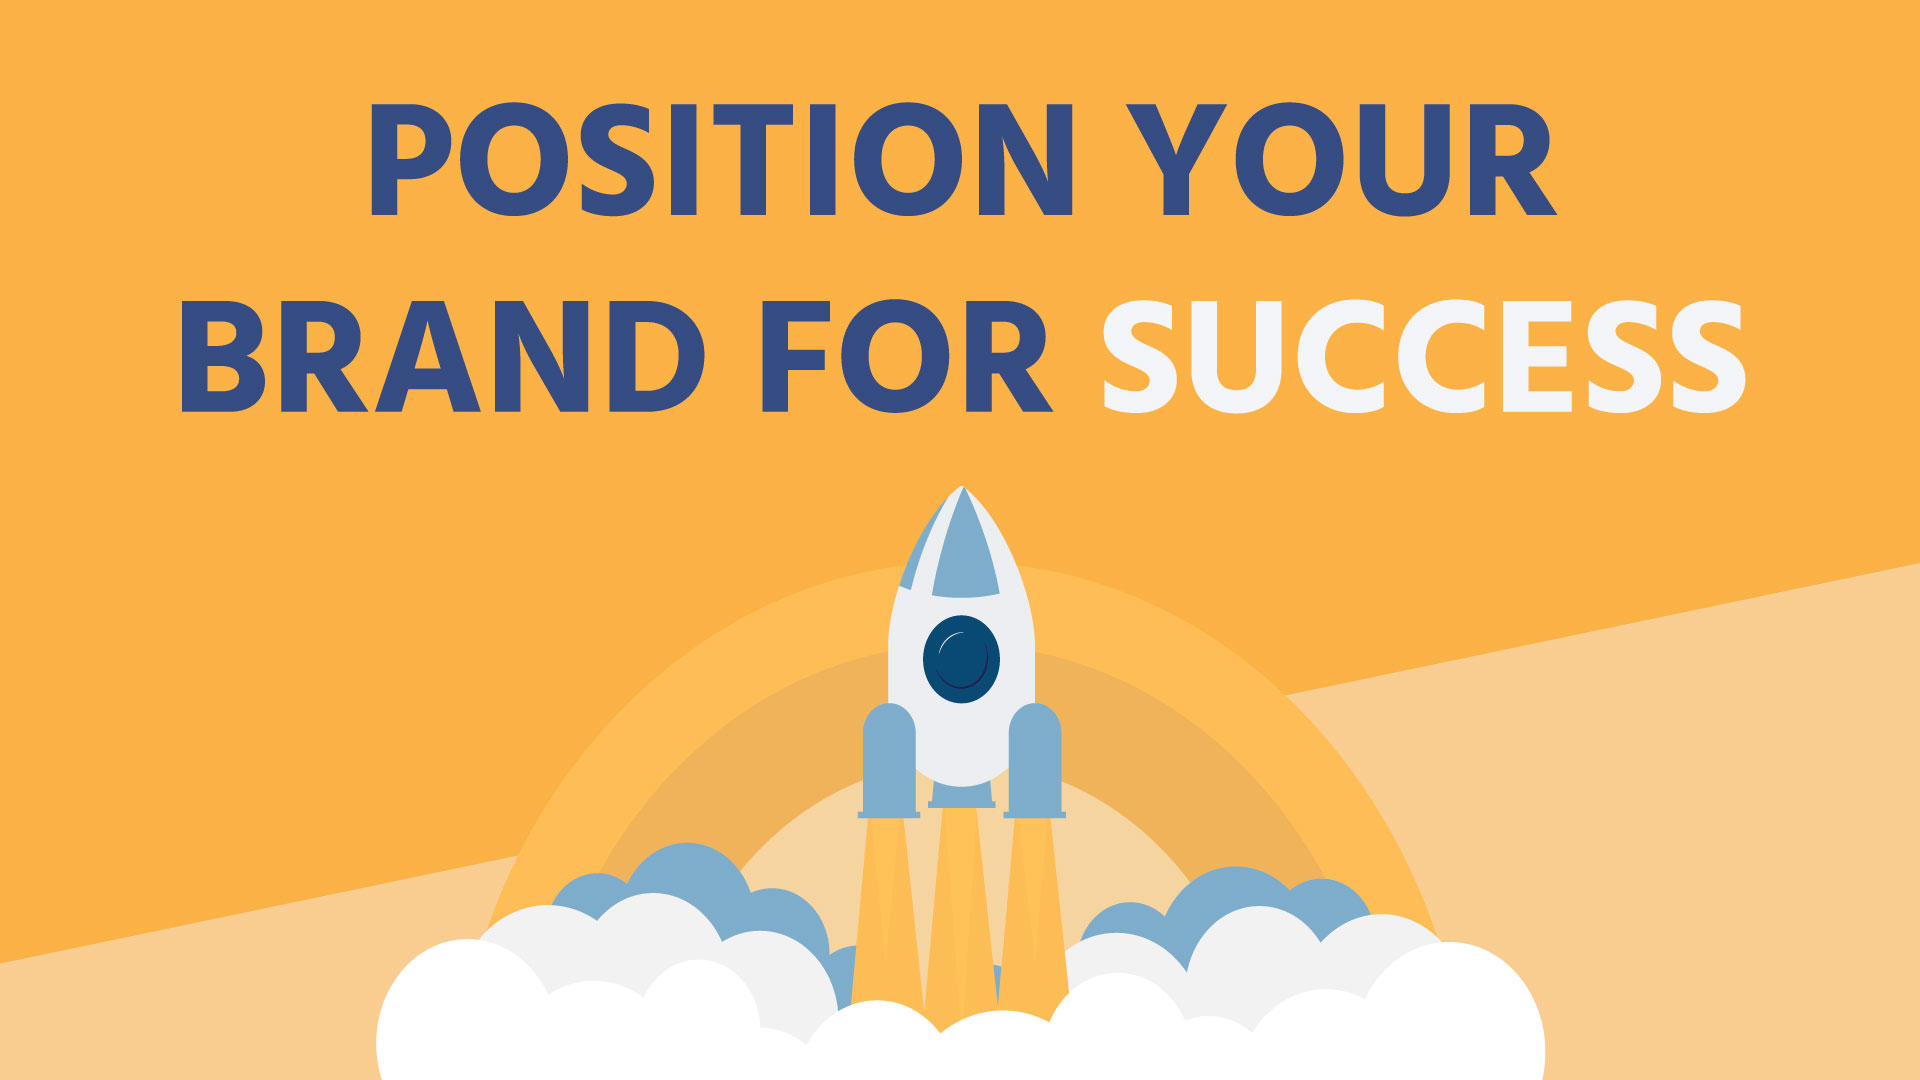 Position your brand for success 